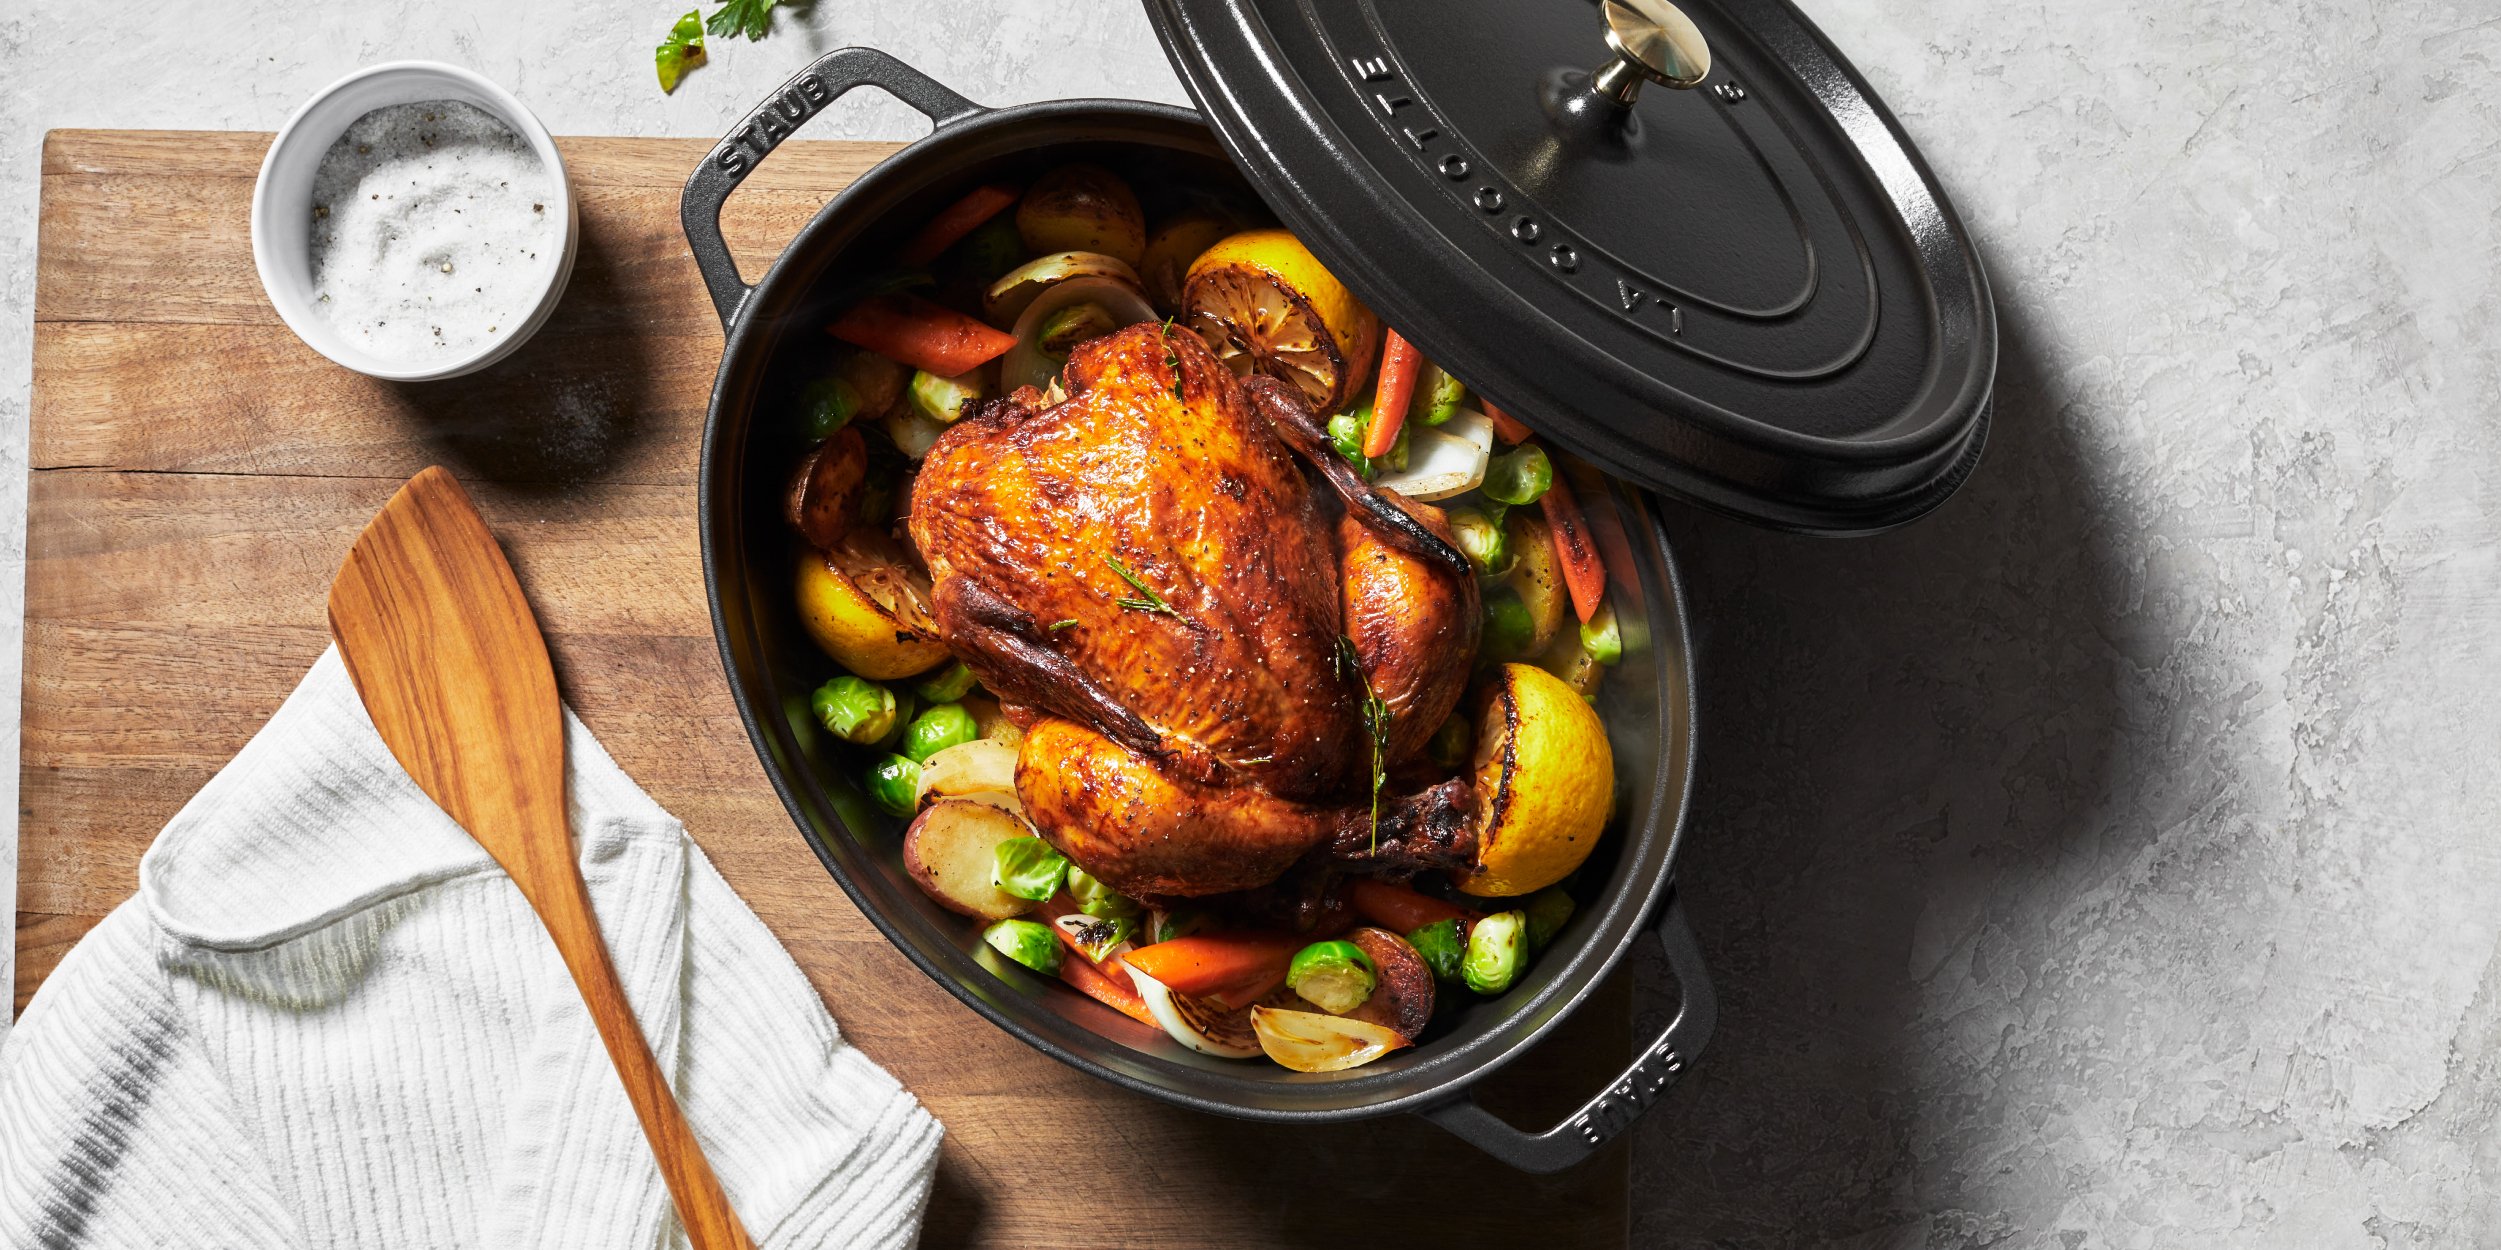 https://www.zwilling.com/on/demandware.static/-/Sites-zwilling-us-Library/default/dw9619f5fc/images/product-content/masonry-content/staub/cast-iron/cocotte/OvalCocottes_Mason_Comp_1200-600_OvalCocotteMasonry.jpg